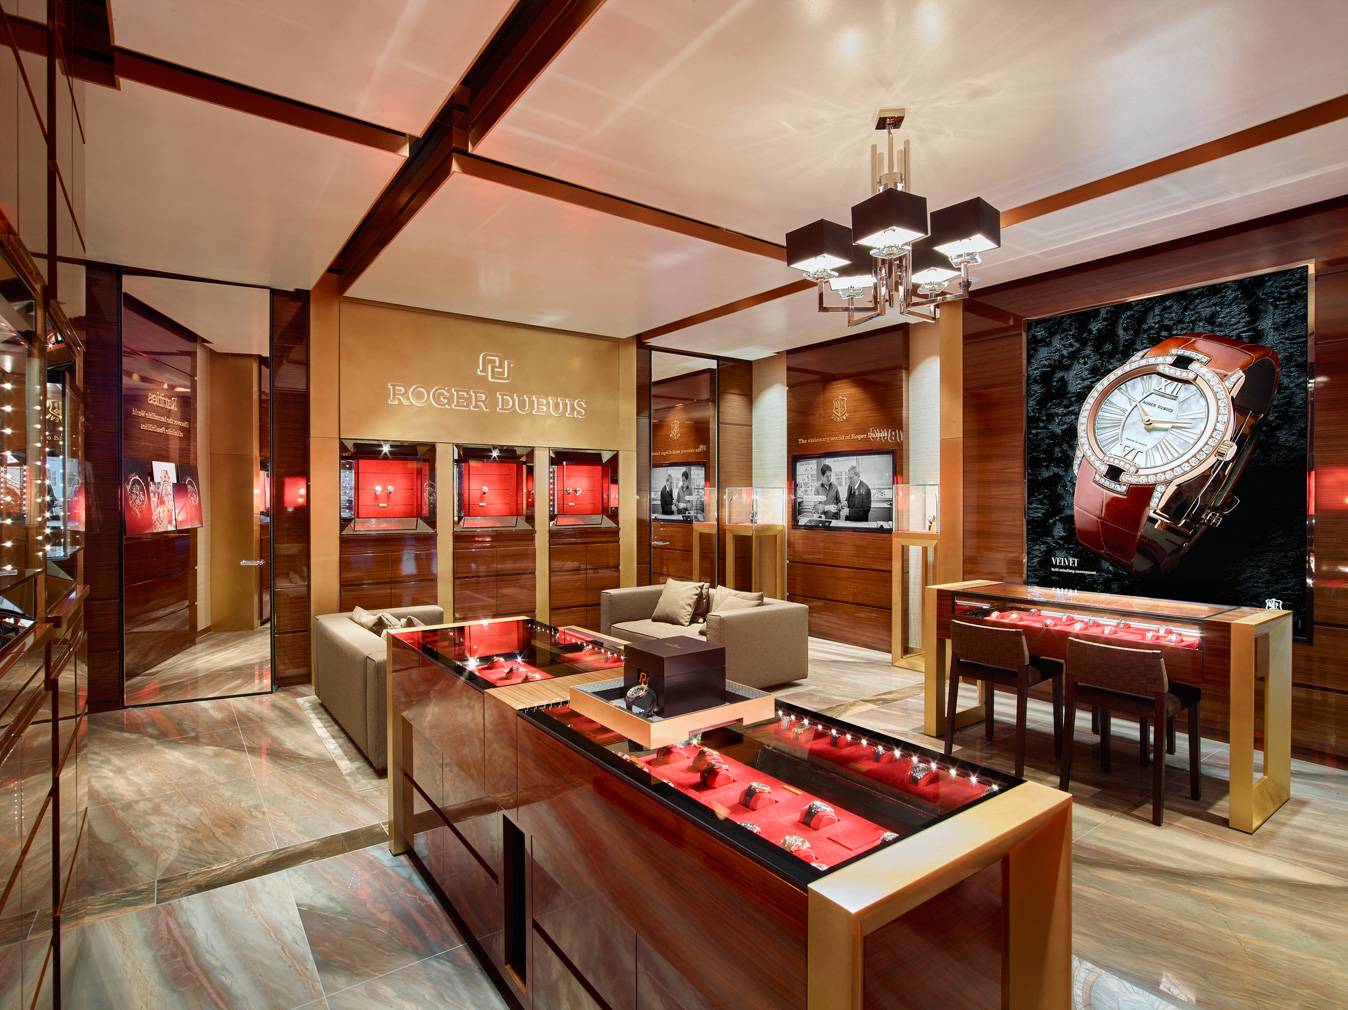 Roger Dubuis Opens First-Ever U.S. Boutique in NYC